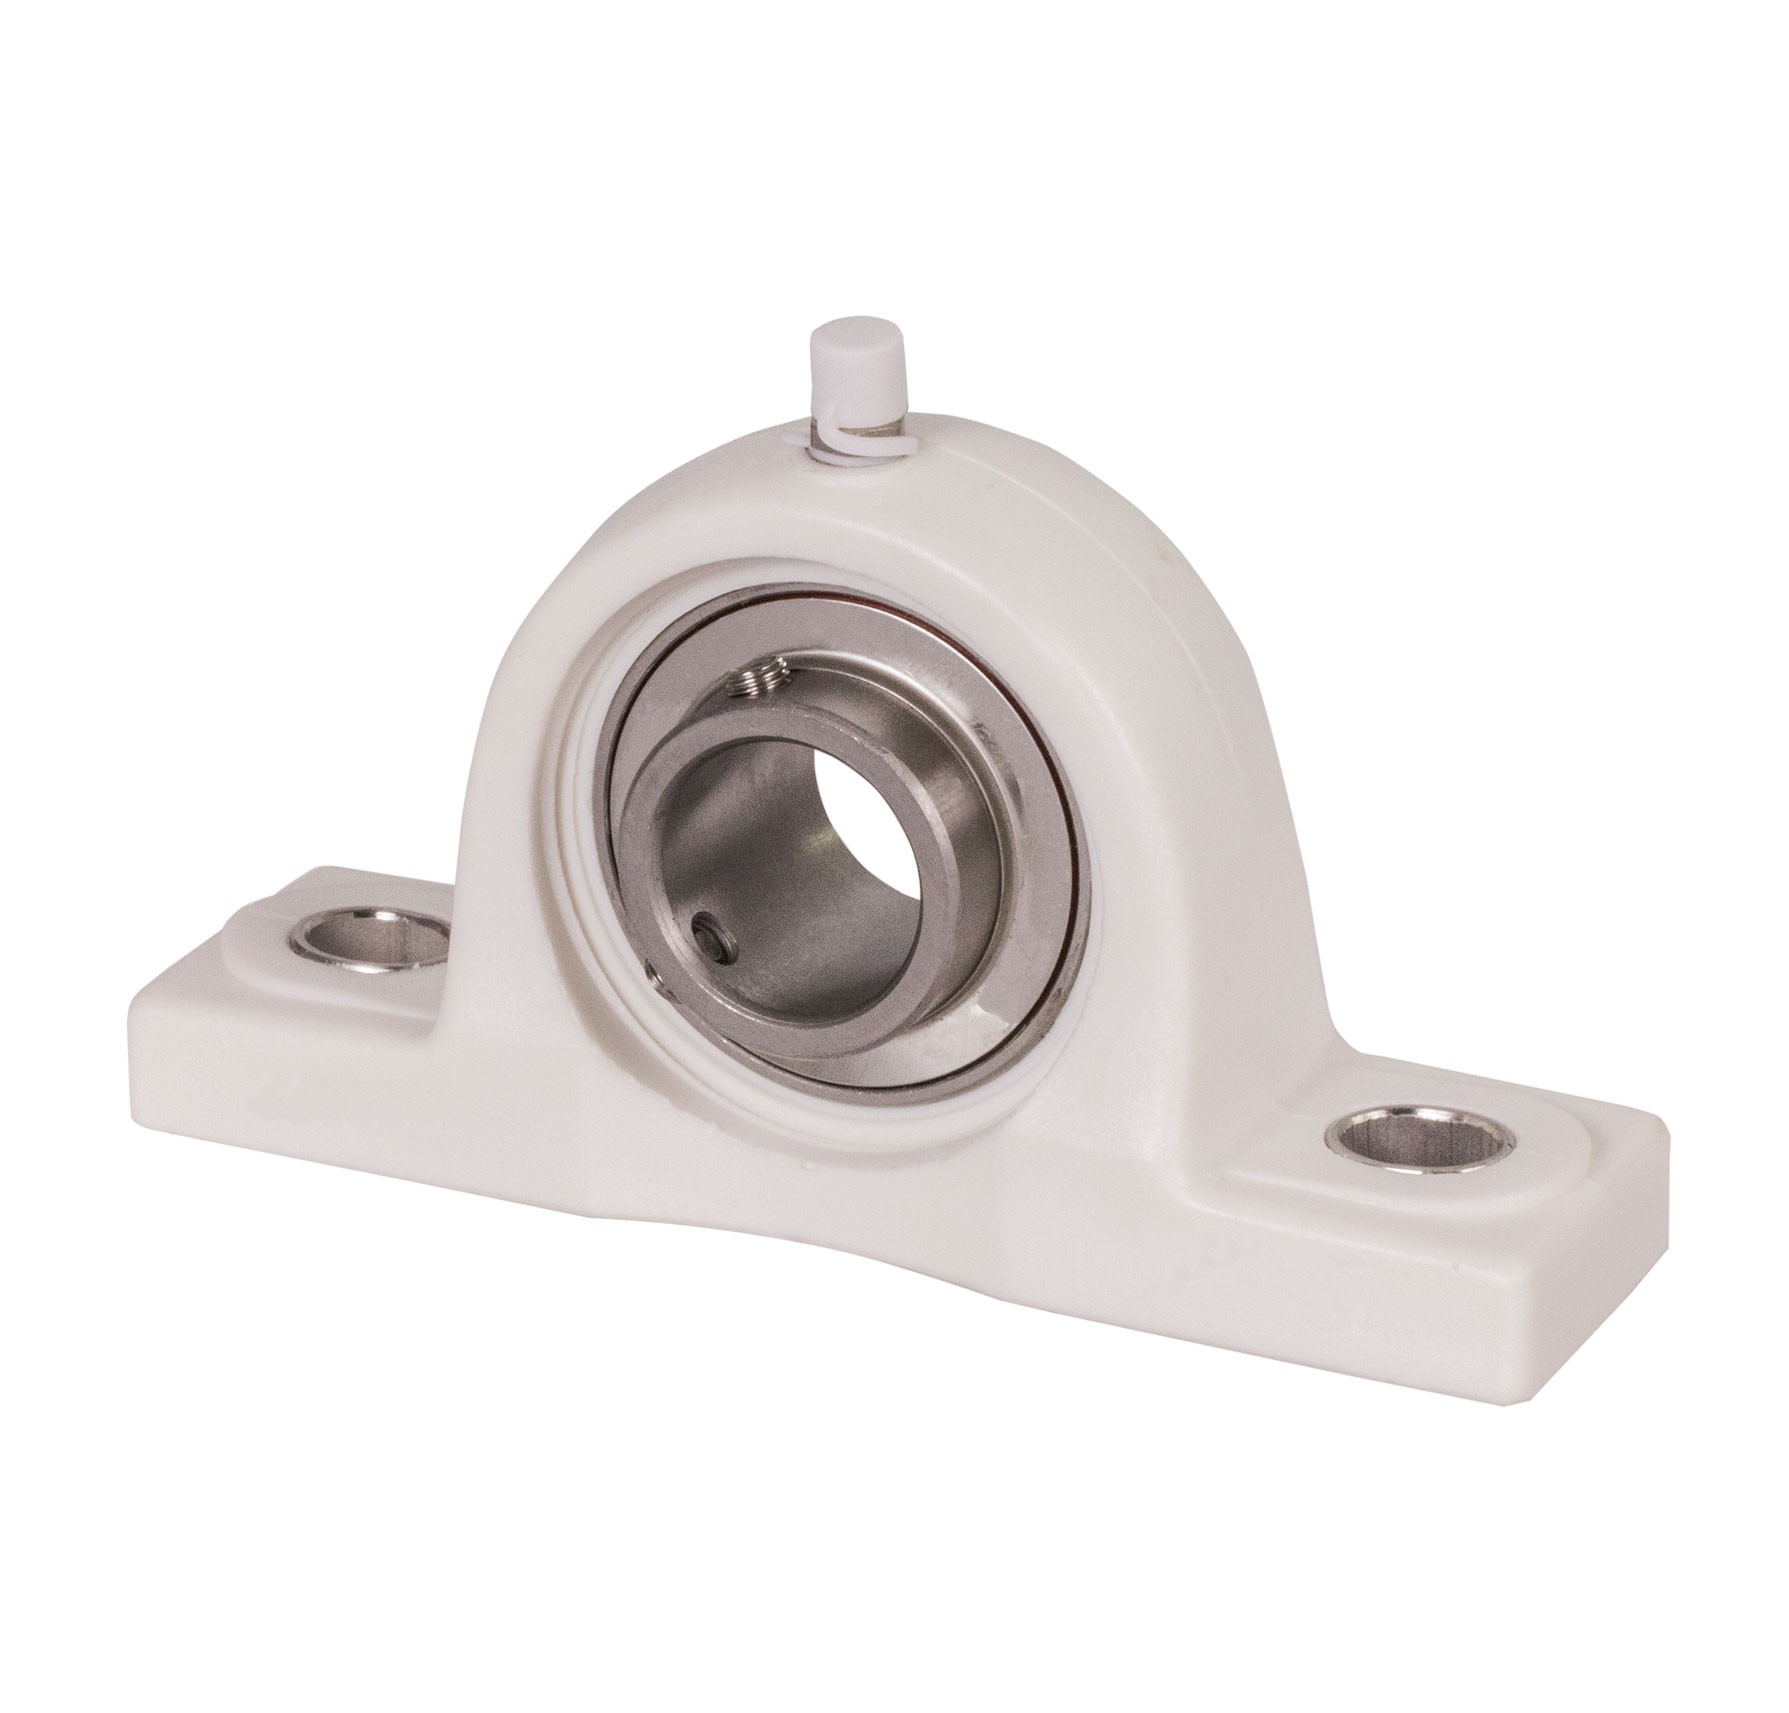 Ball flange bearing TUCF 203 bore 17mm housing from thermoplast black bearing stainless steel 